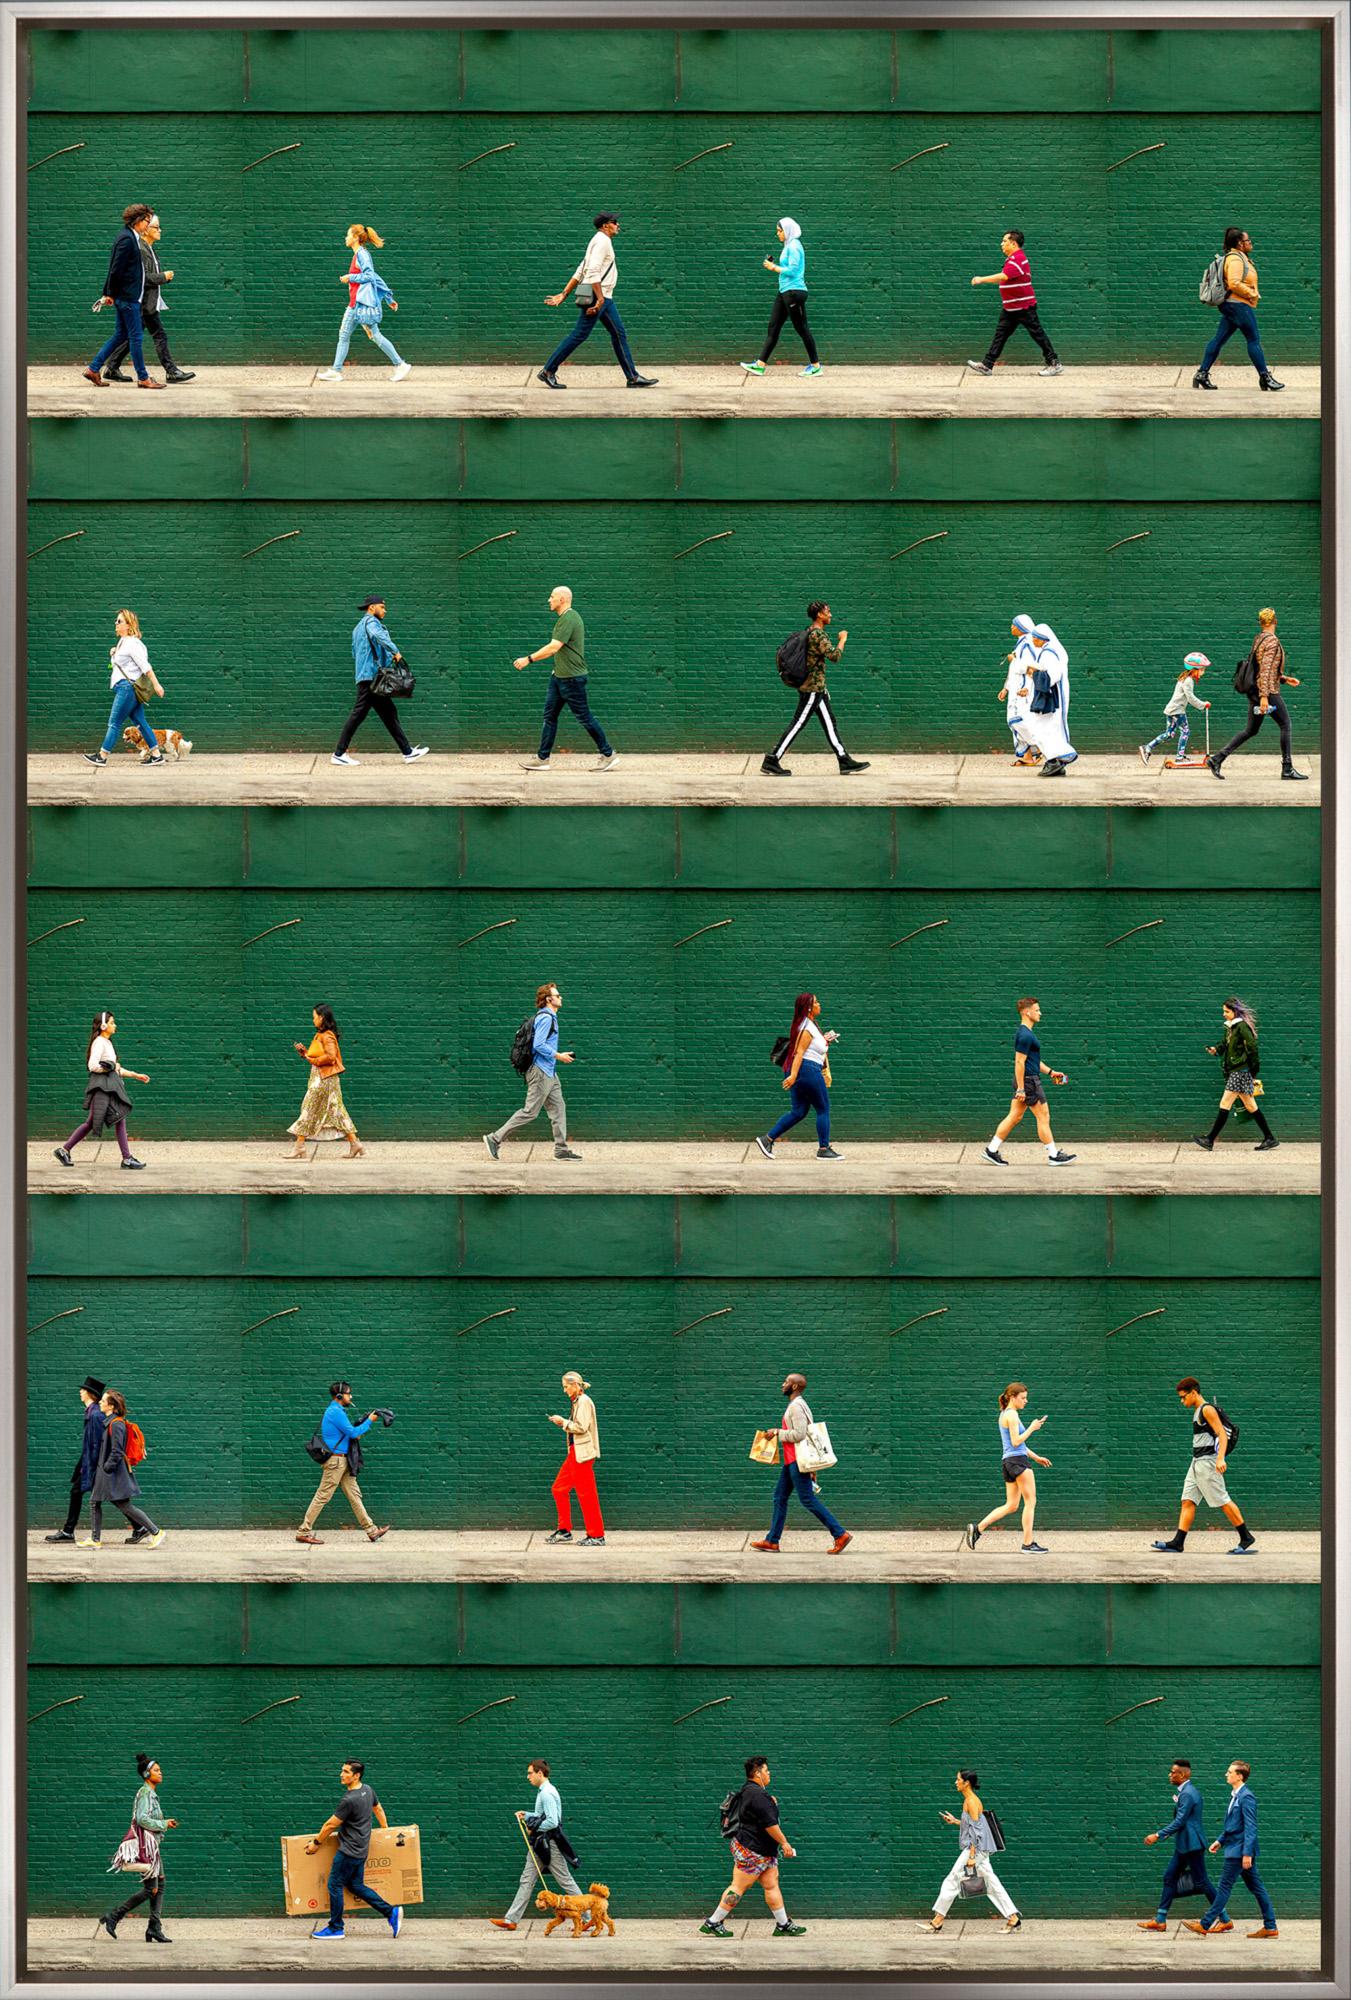 "Christopher Street, NYC" is a framed photograph on aluminum by Xan Padron, depicting a compilation of walking figures set against a painted green brick background. Padron's signature technique of splicing together individual photographs to craft a